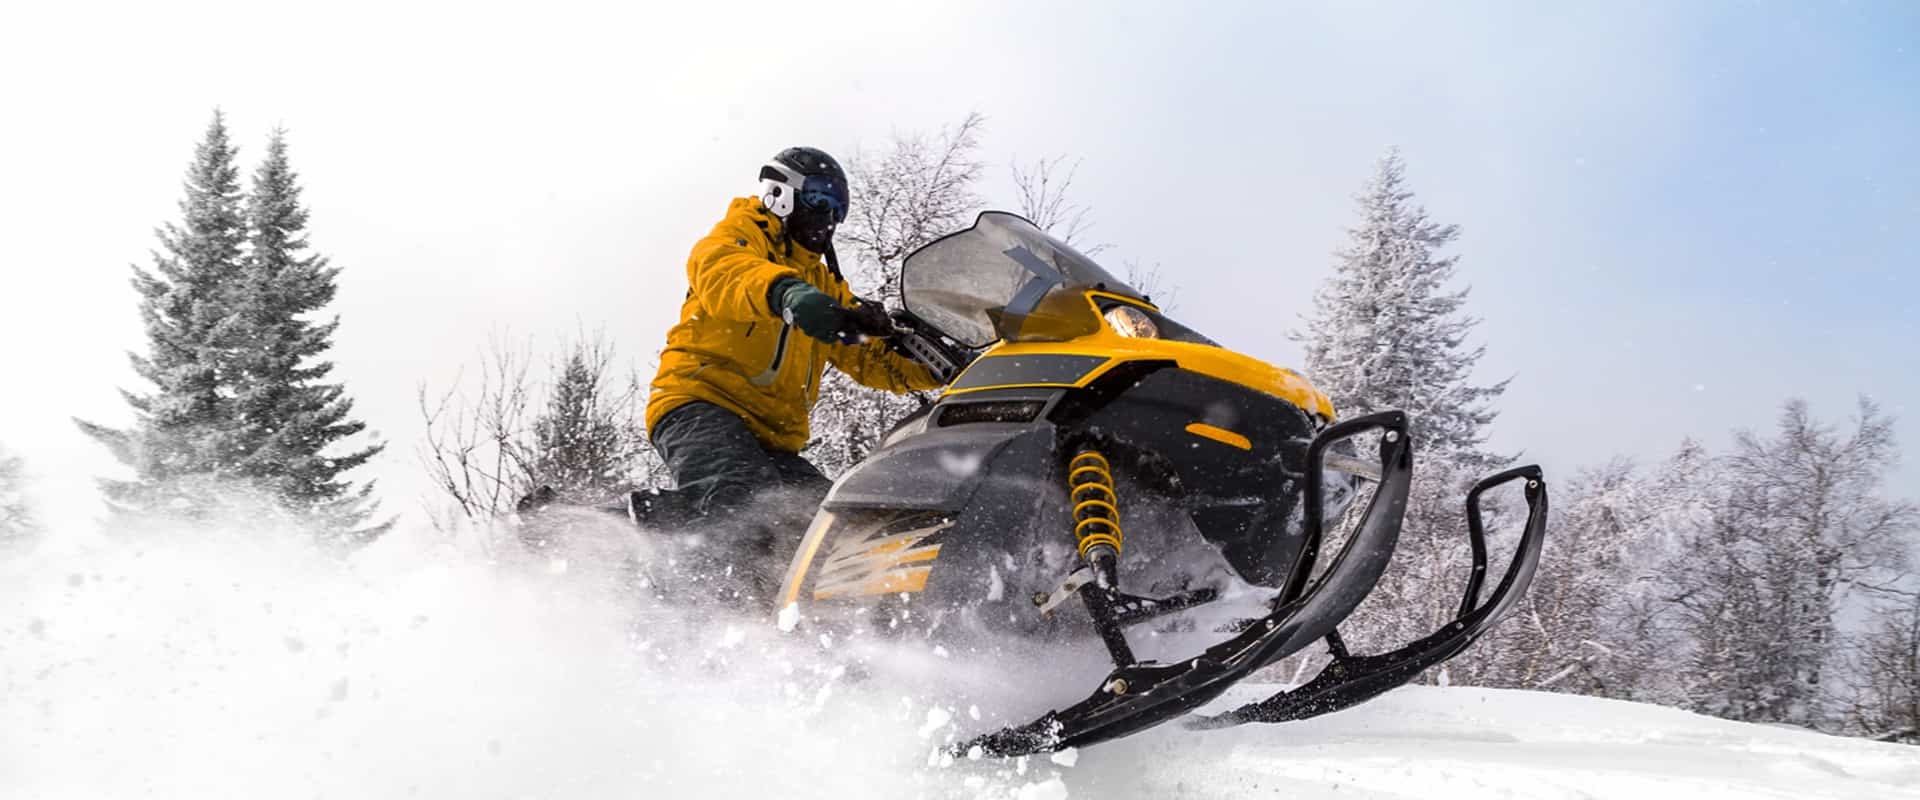 Is snowmobiling tiring?